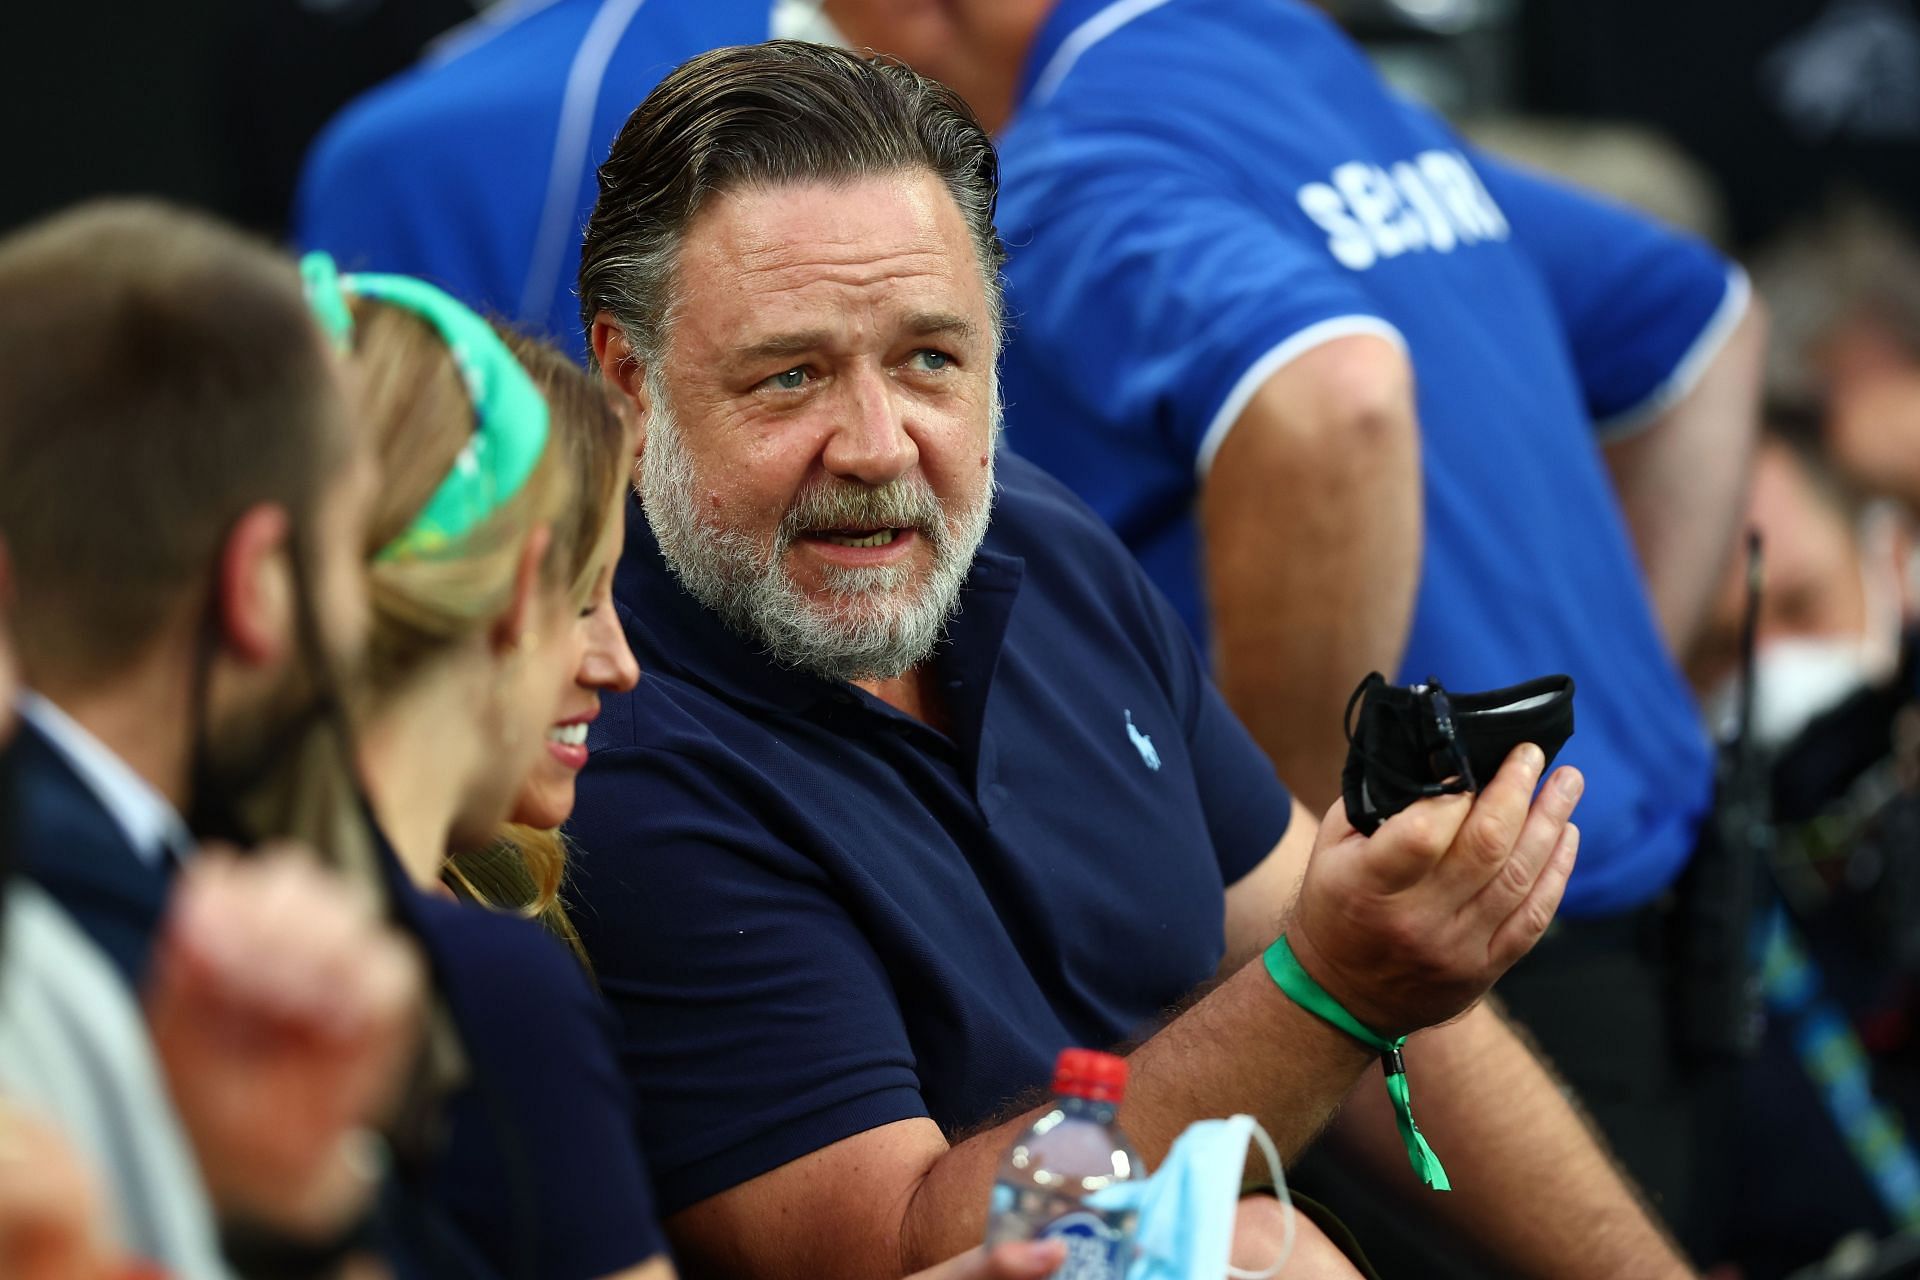 Russell Crowe had a court-side seat to witness Barty in action